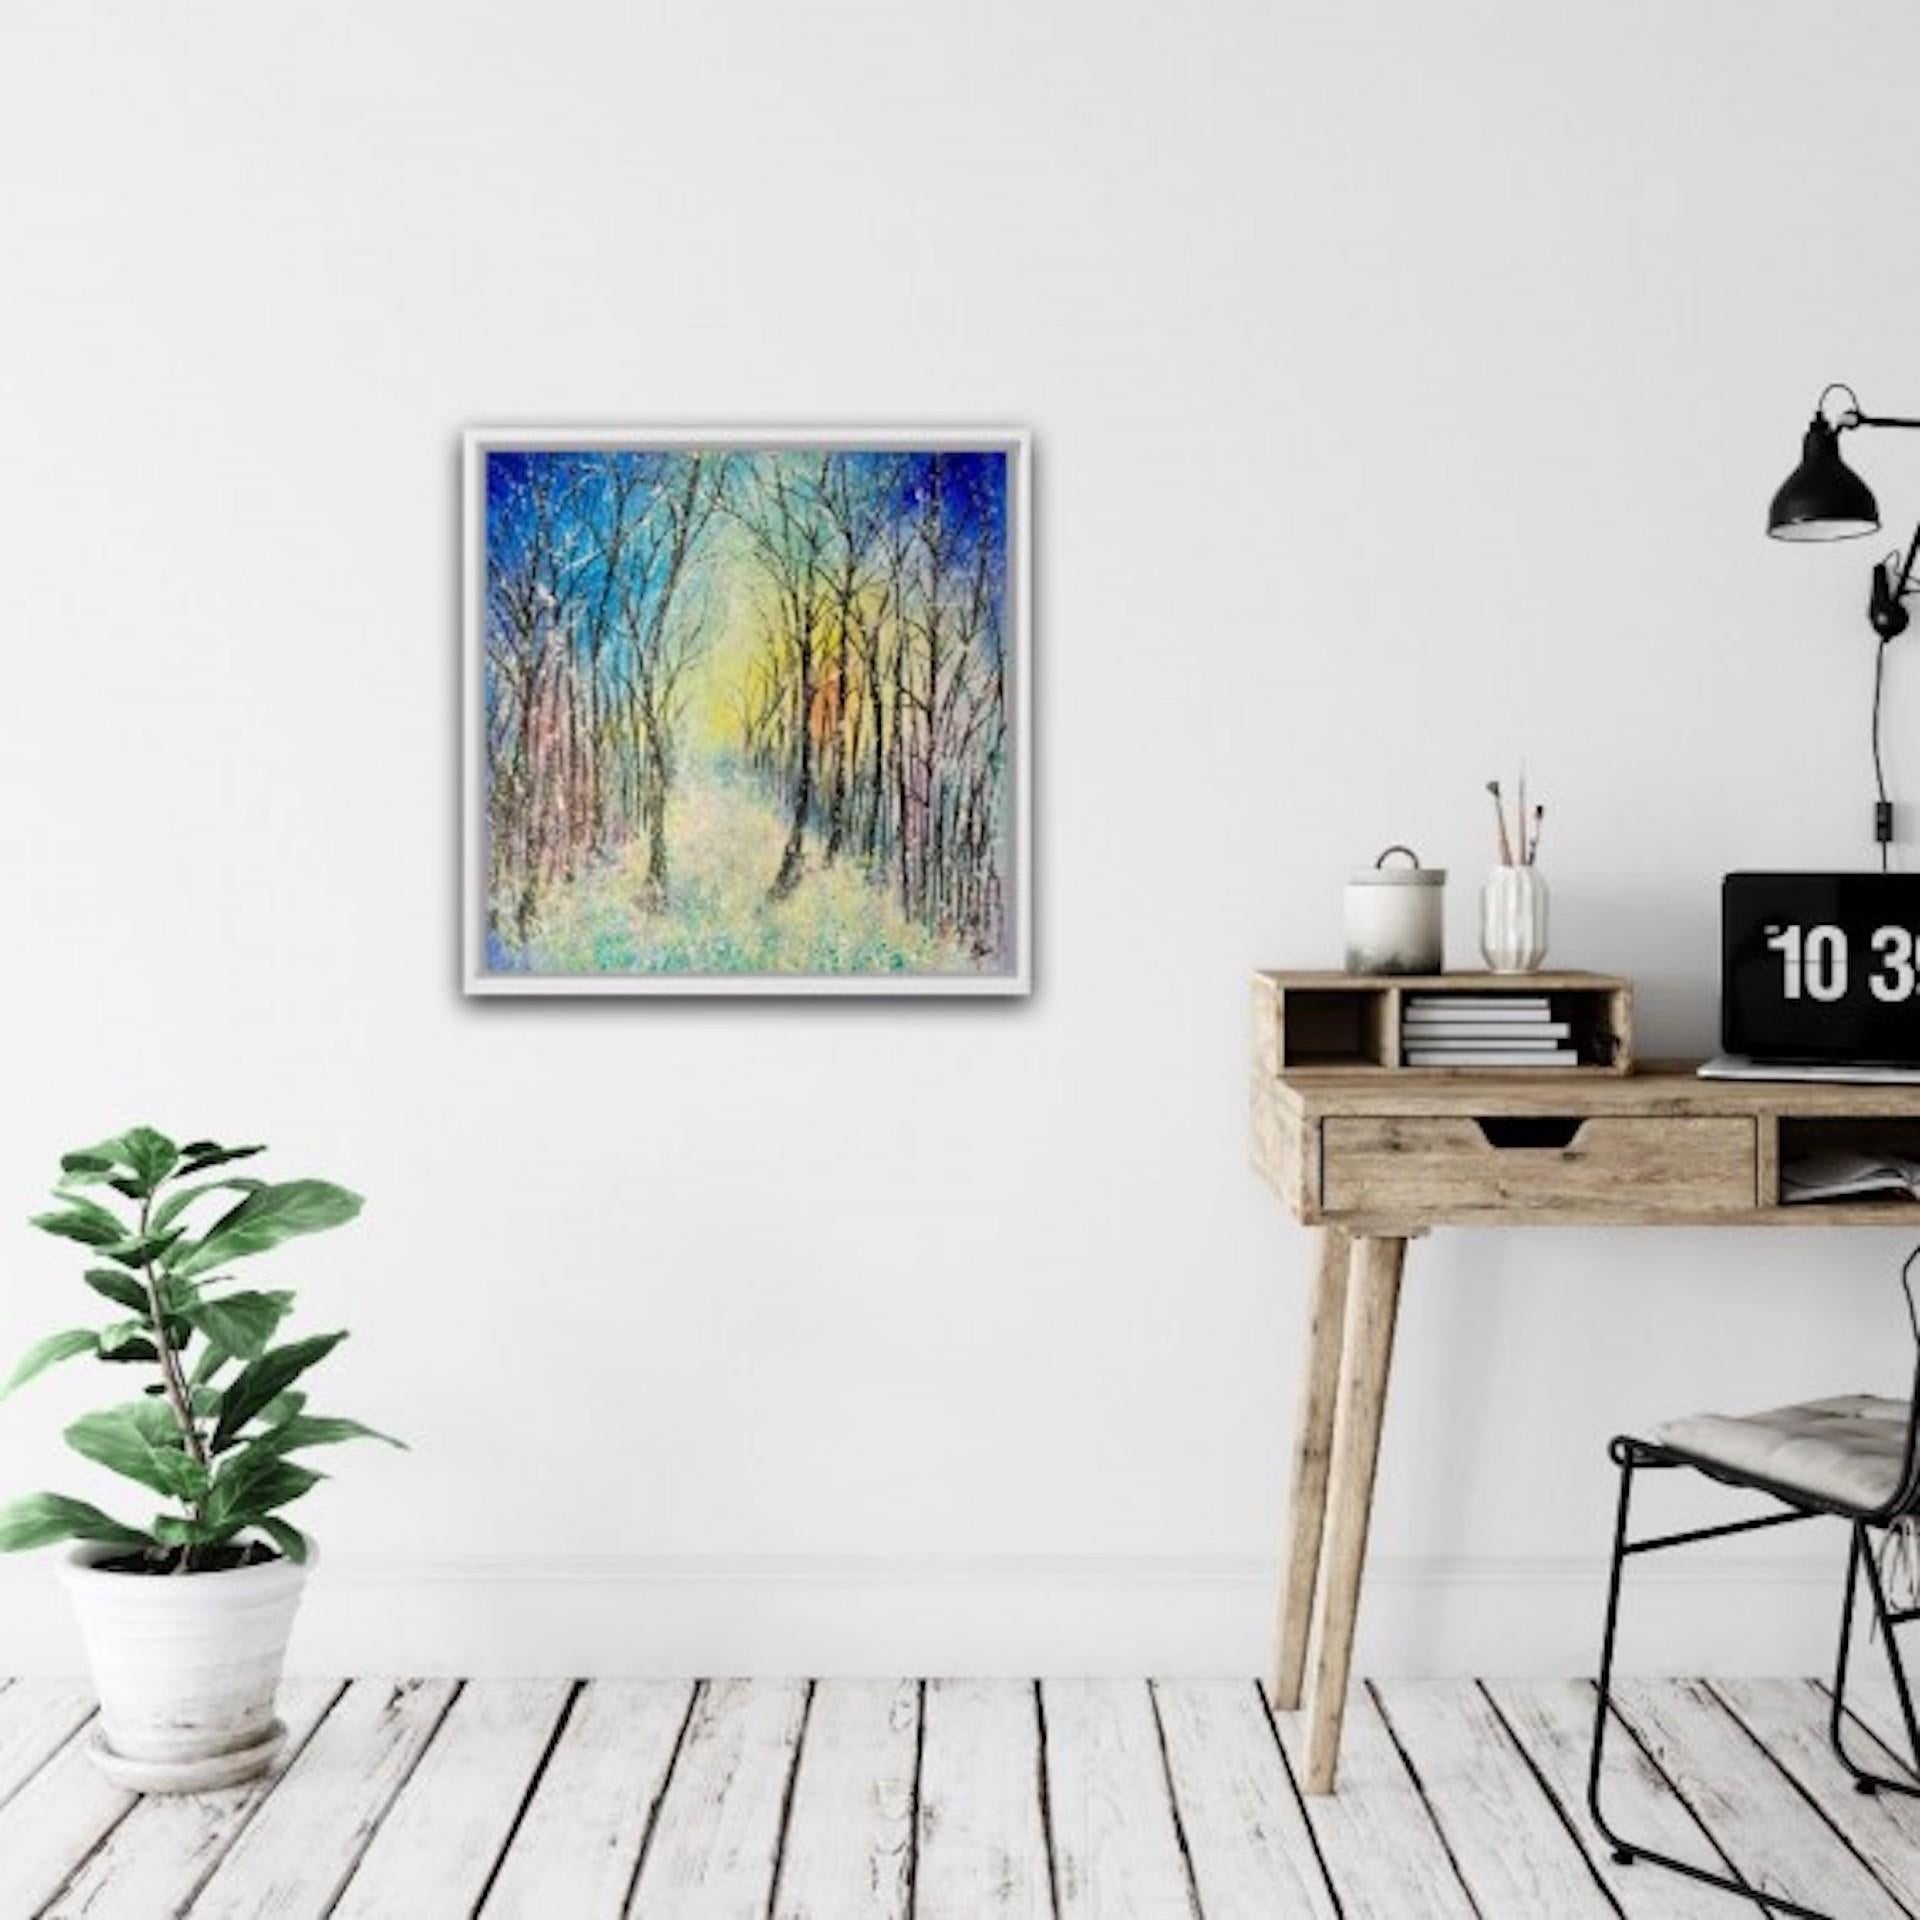 Winter Woodland by Jan Rogers [2020]
original

Acrylic paint on canvas

Image size: H:50 cm x W:50 cm

Complete Size of Unframed Work: H:50 cm x W:50 cm x D:2cm

Sold Unframed

Please note that insitu images are purely an indication of how a piece